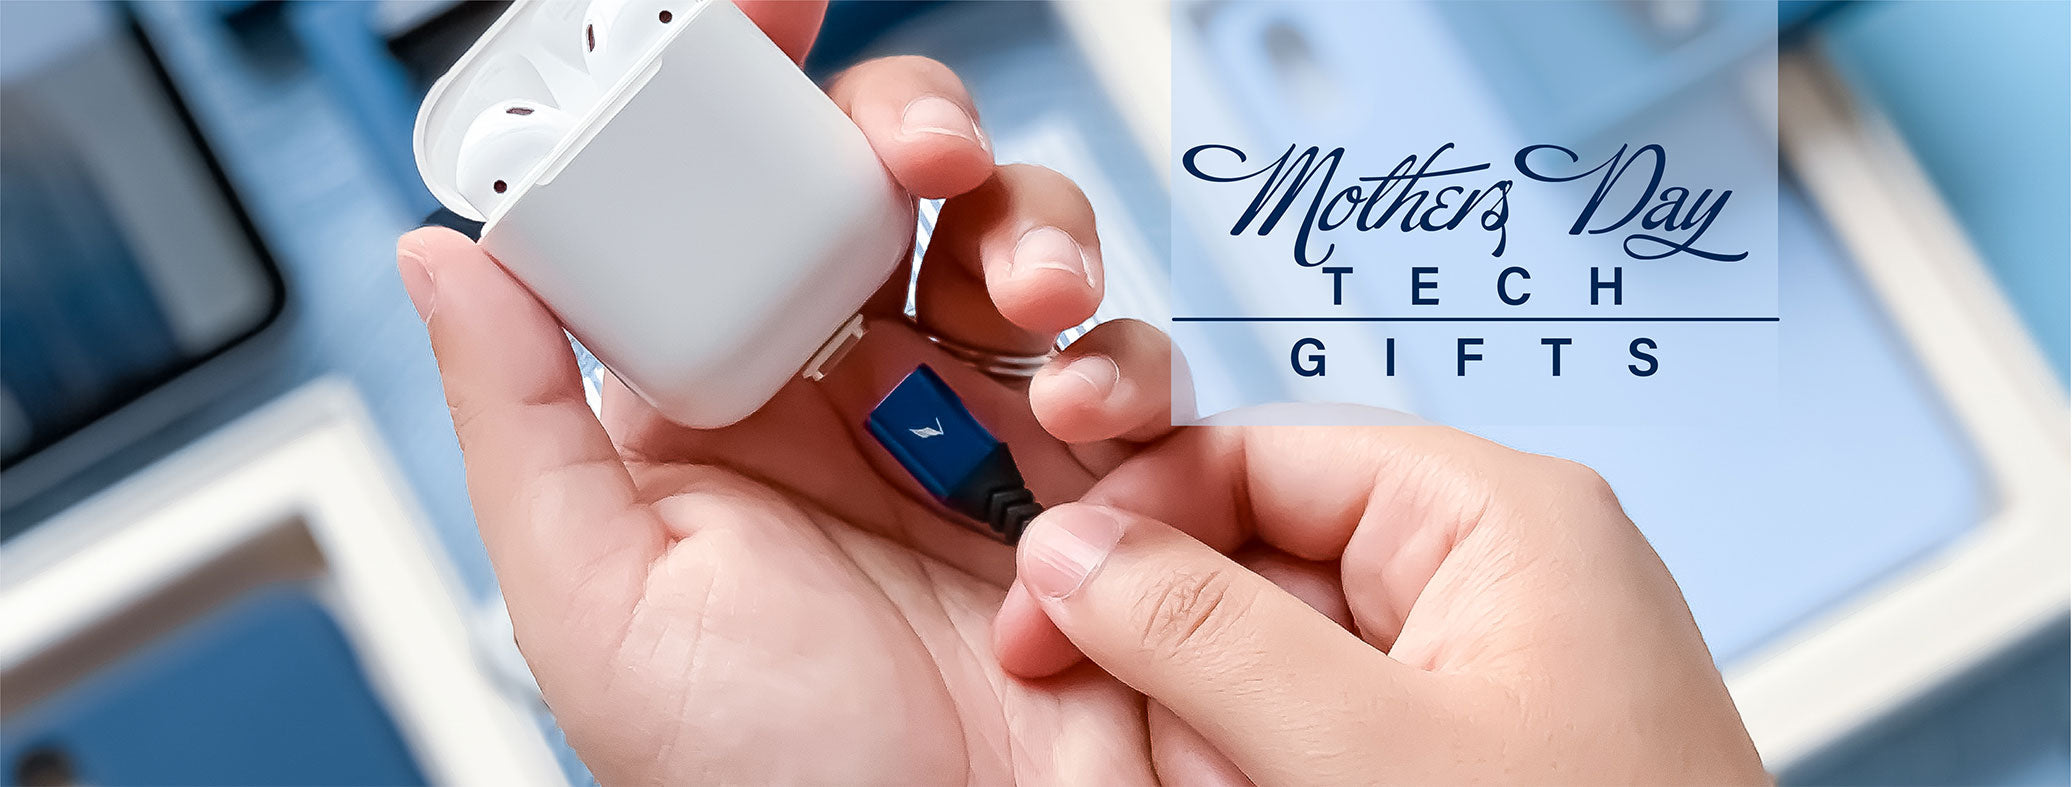 The Best Tech Gifts for Mother's Day